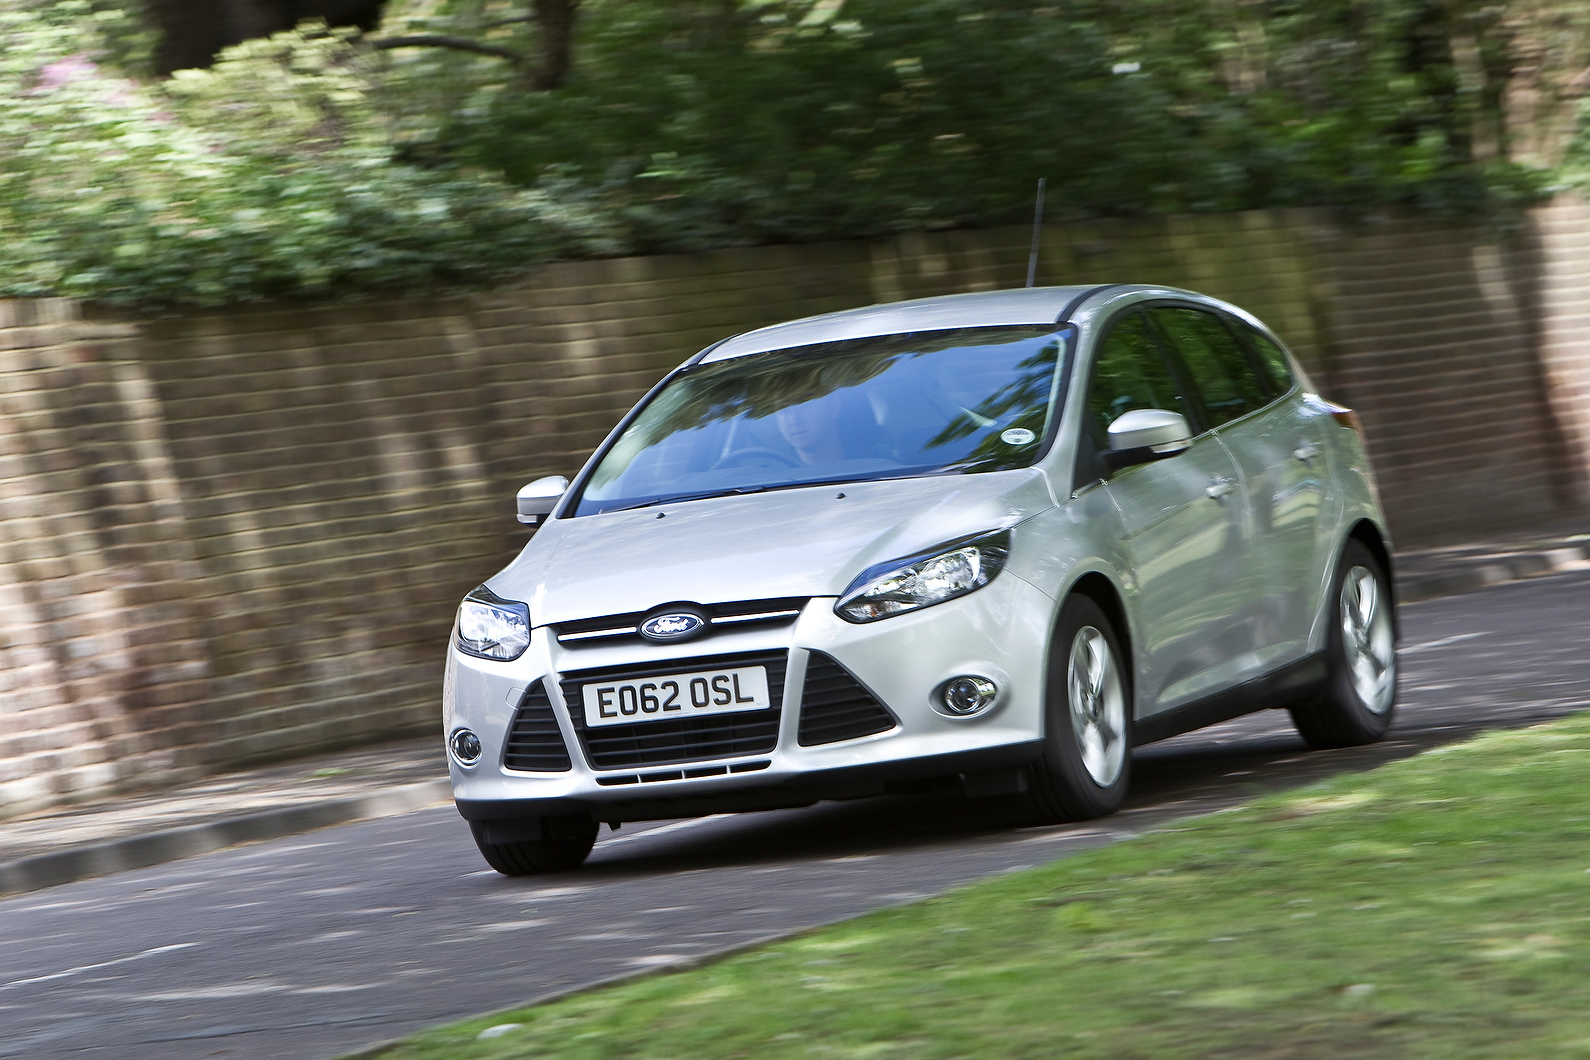 Ford focus 1.6 tdci econetic review #6